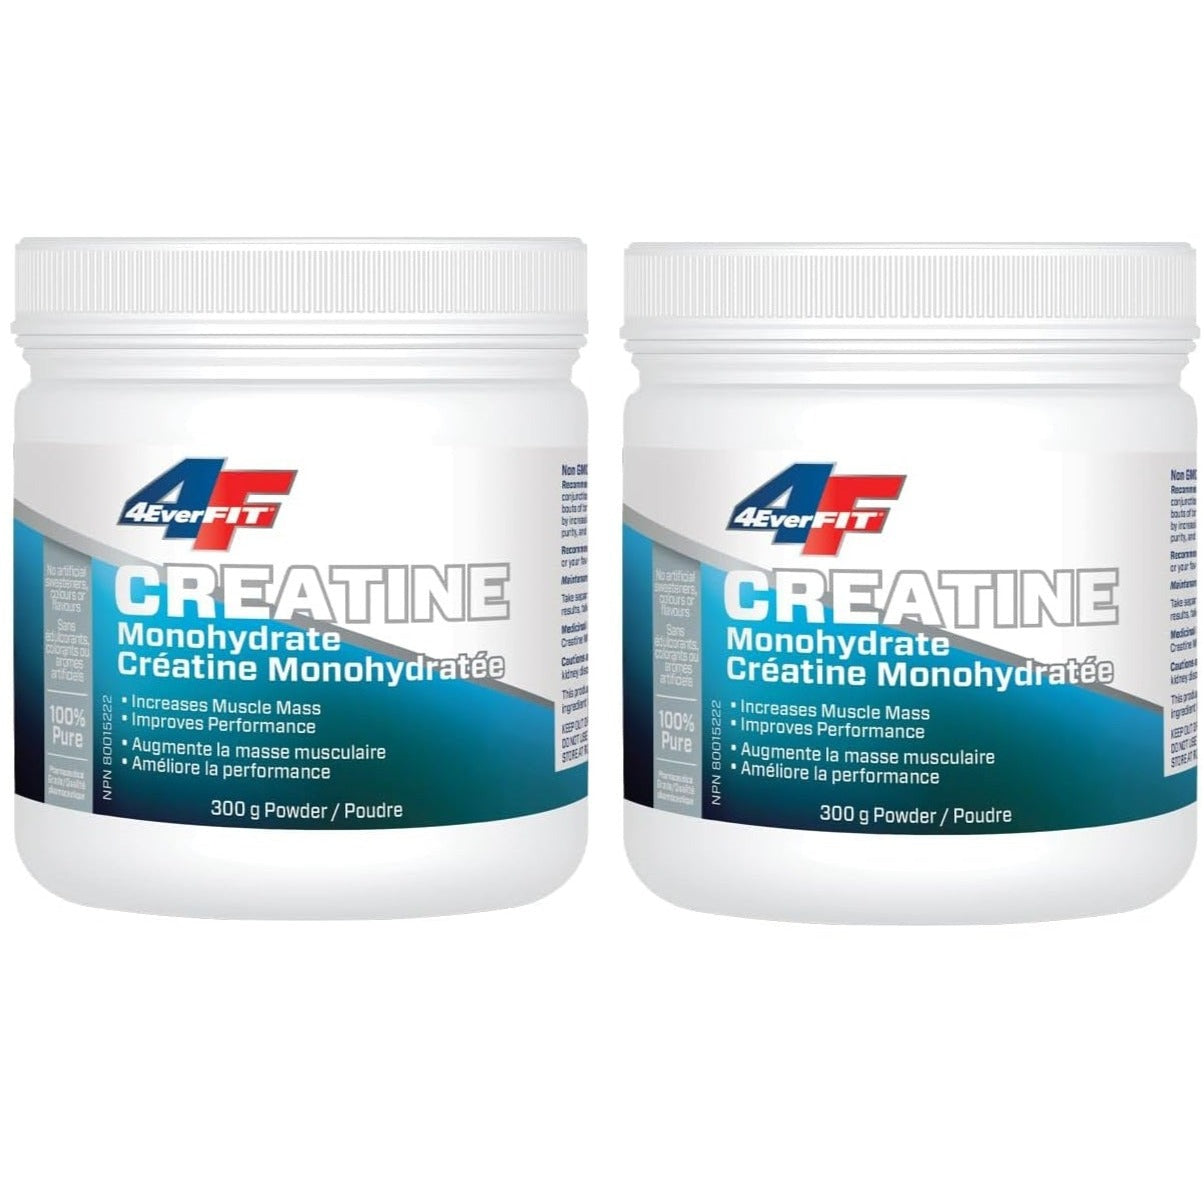 4Ever Fit Creatine Monohydrate 600g(300g+300g) combo pack Supplements - Amino Acids at Village Vitamin Store